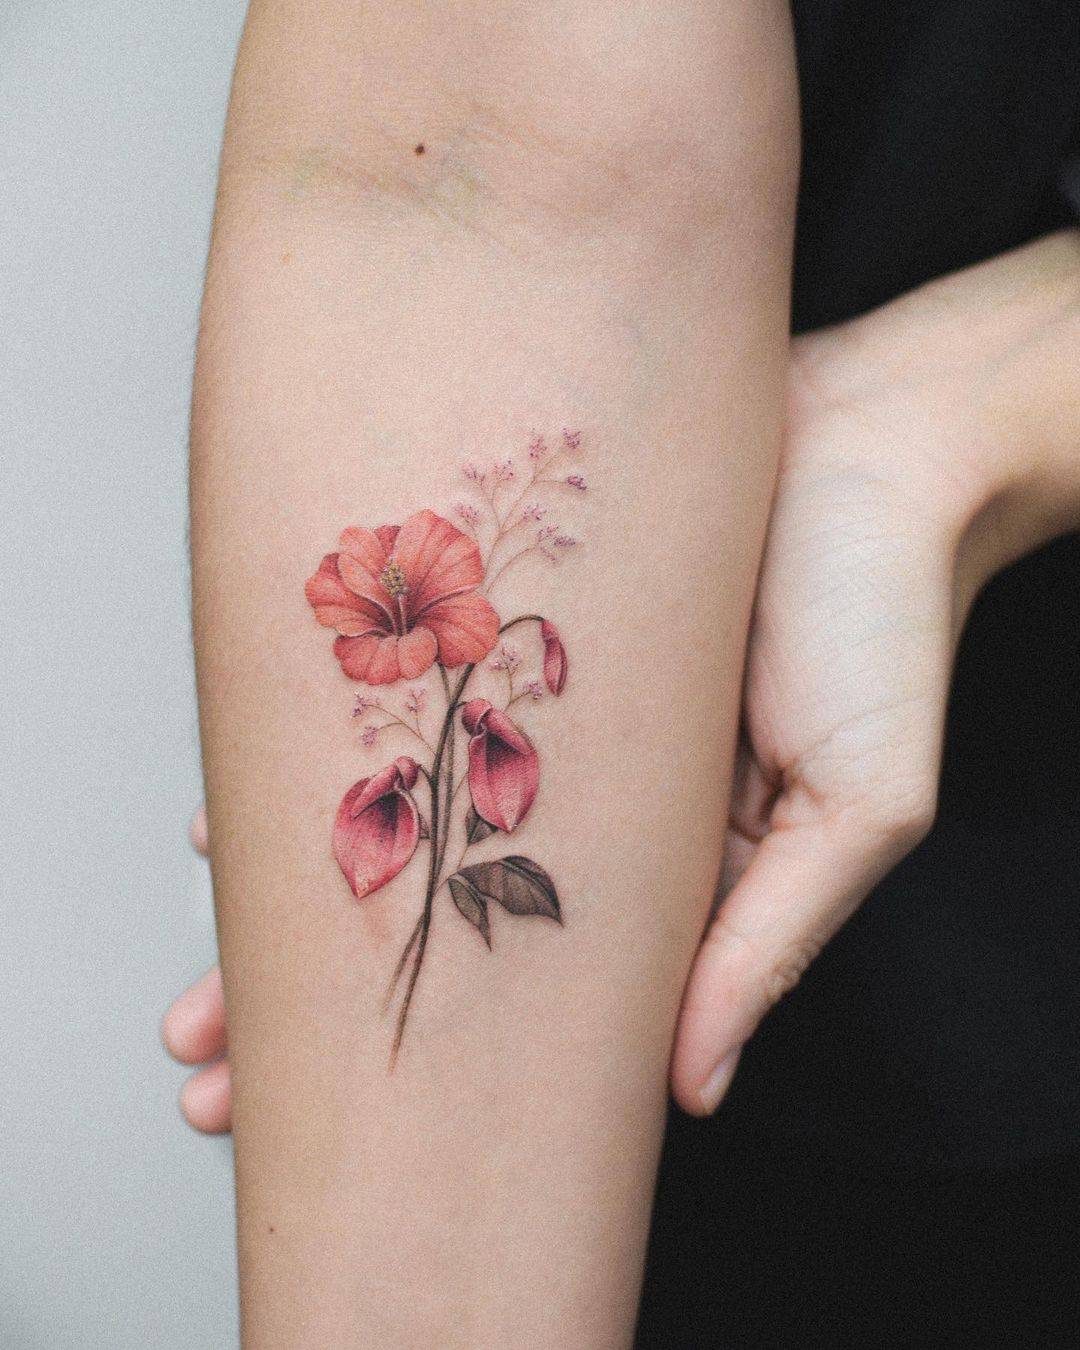 Colored flower tattoo on arm by bryan.gee